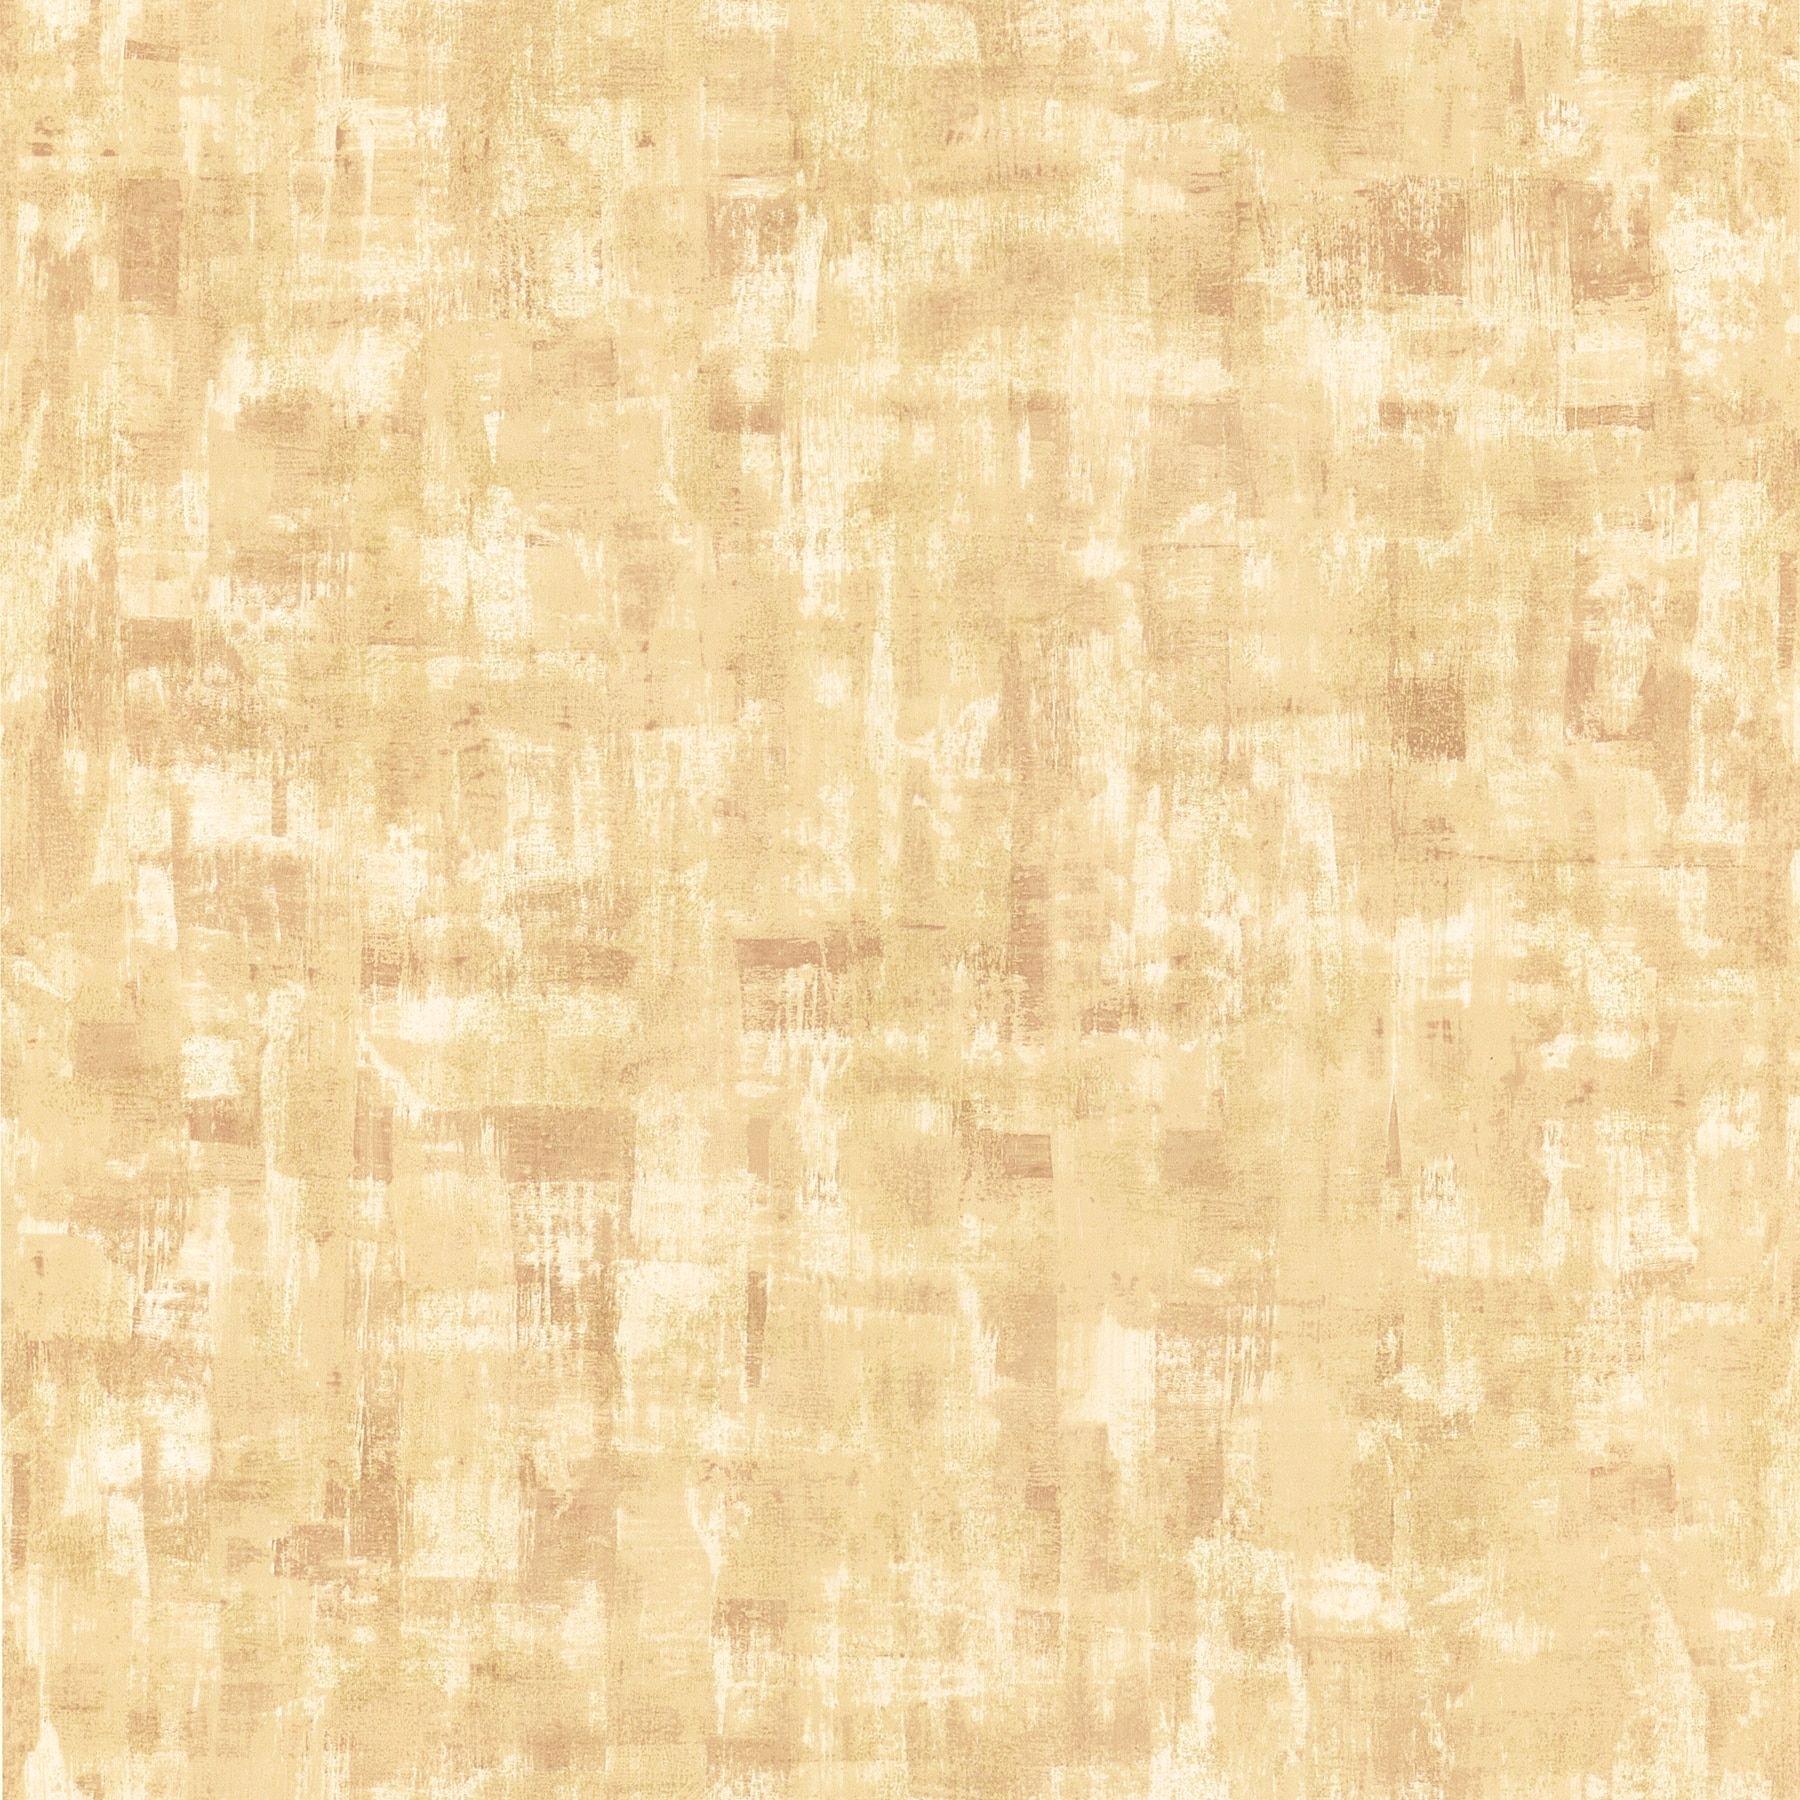 Ready Pasted Wallpaper Light Brown Texture Wallpaper